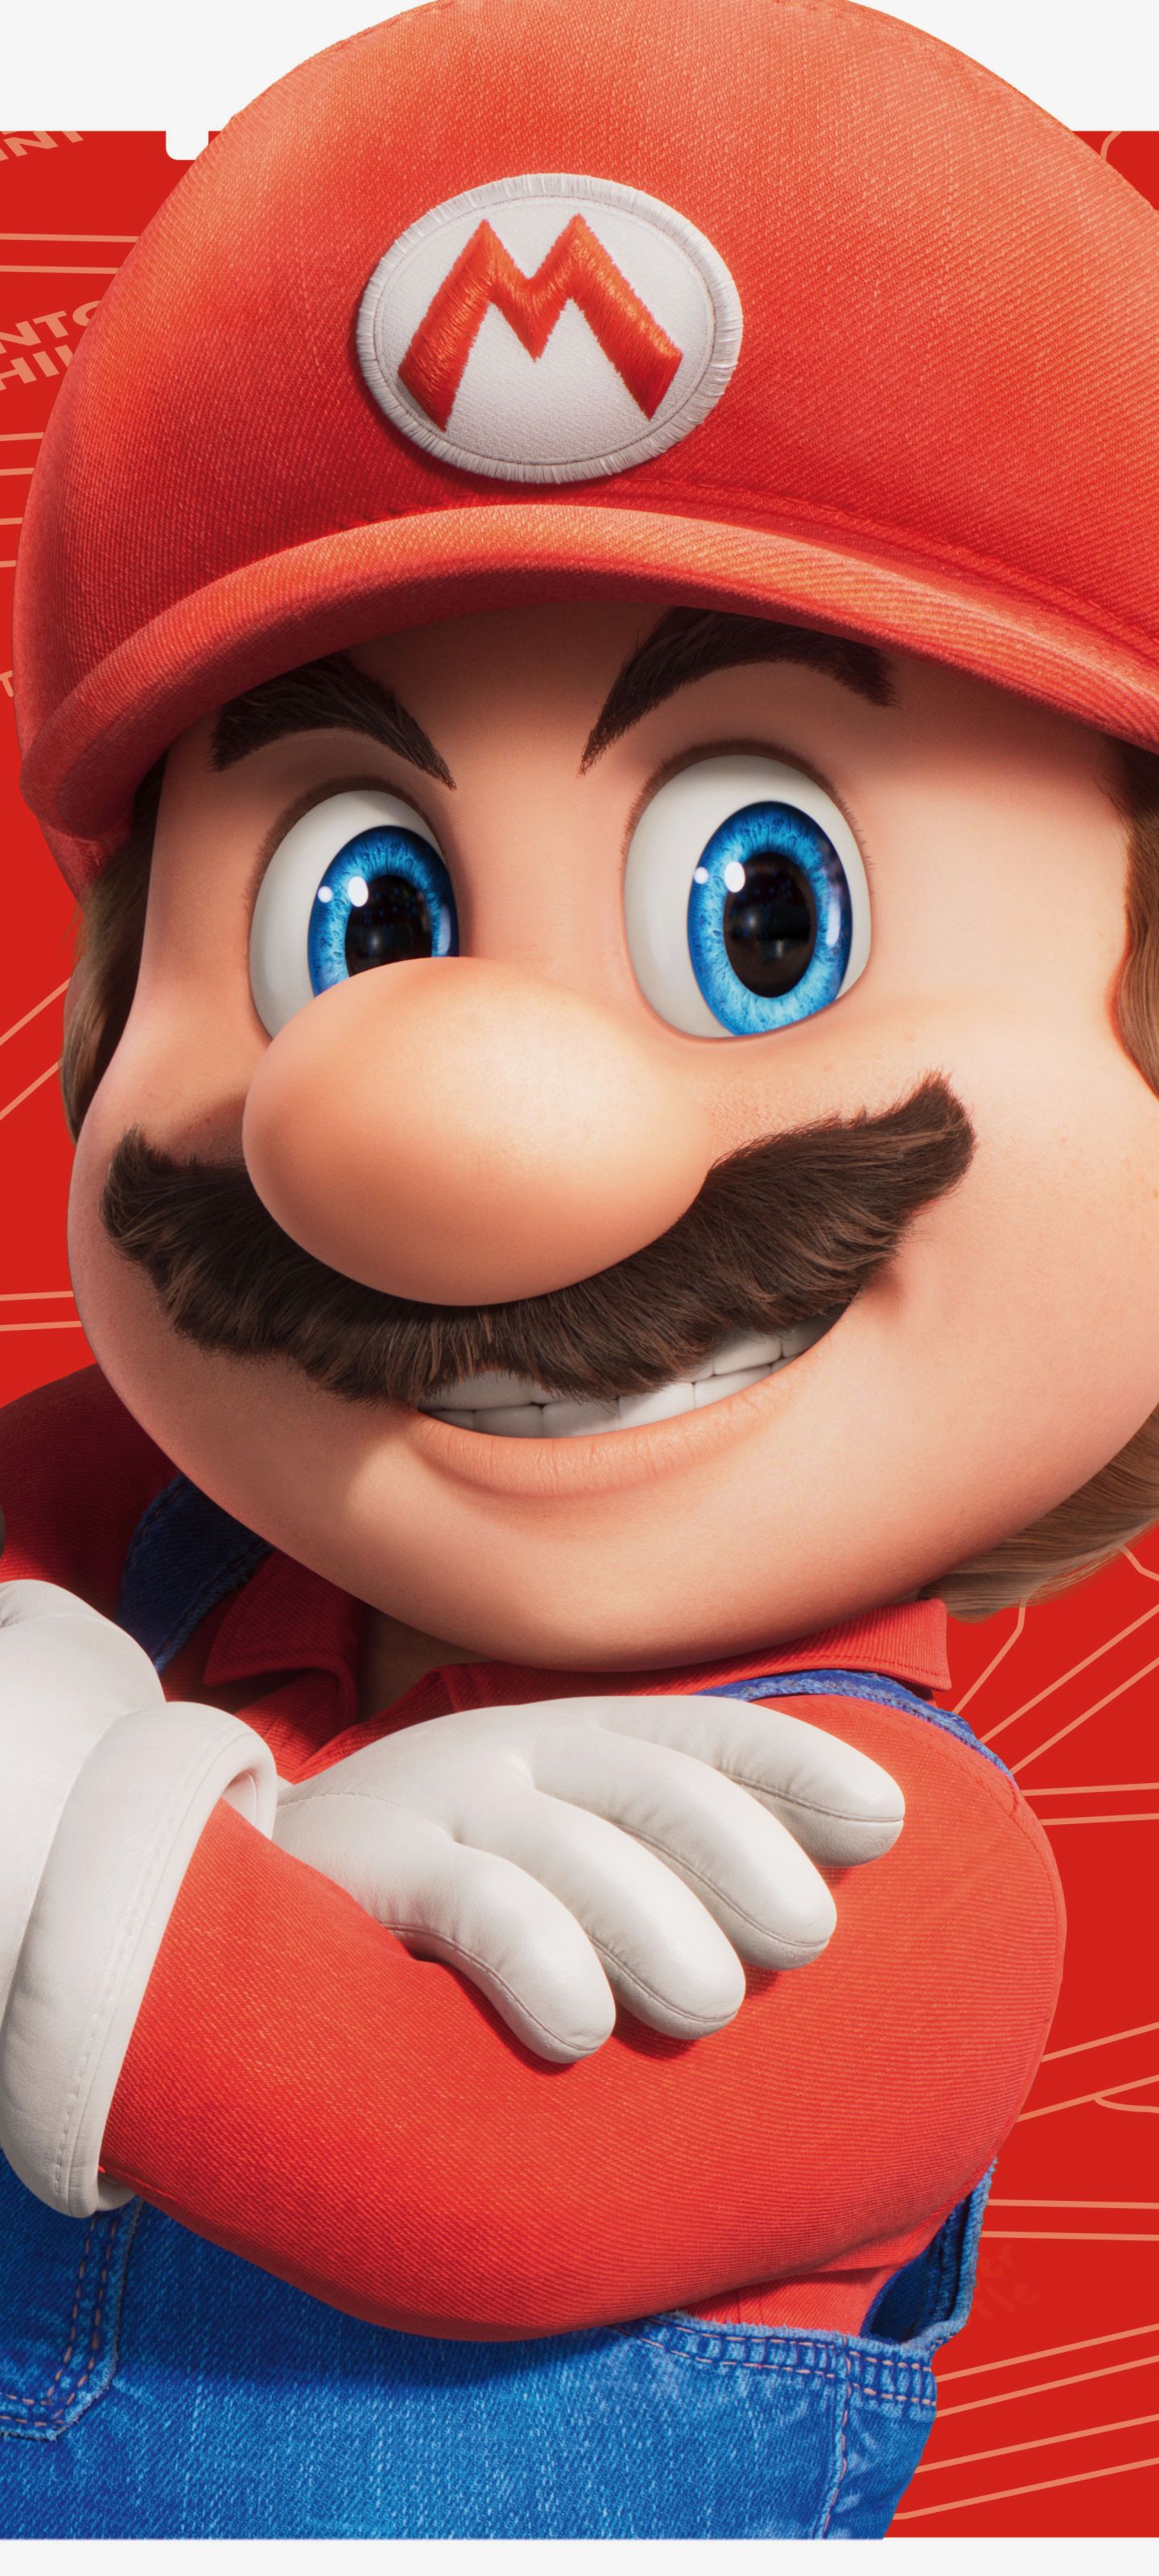 A close up of mario in his red shirt - 